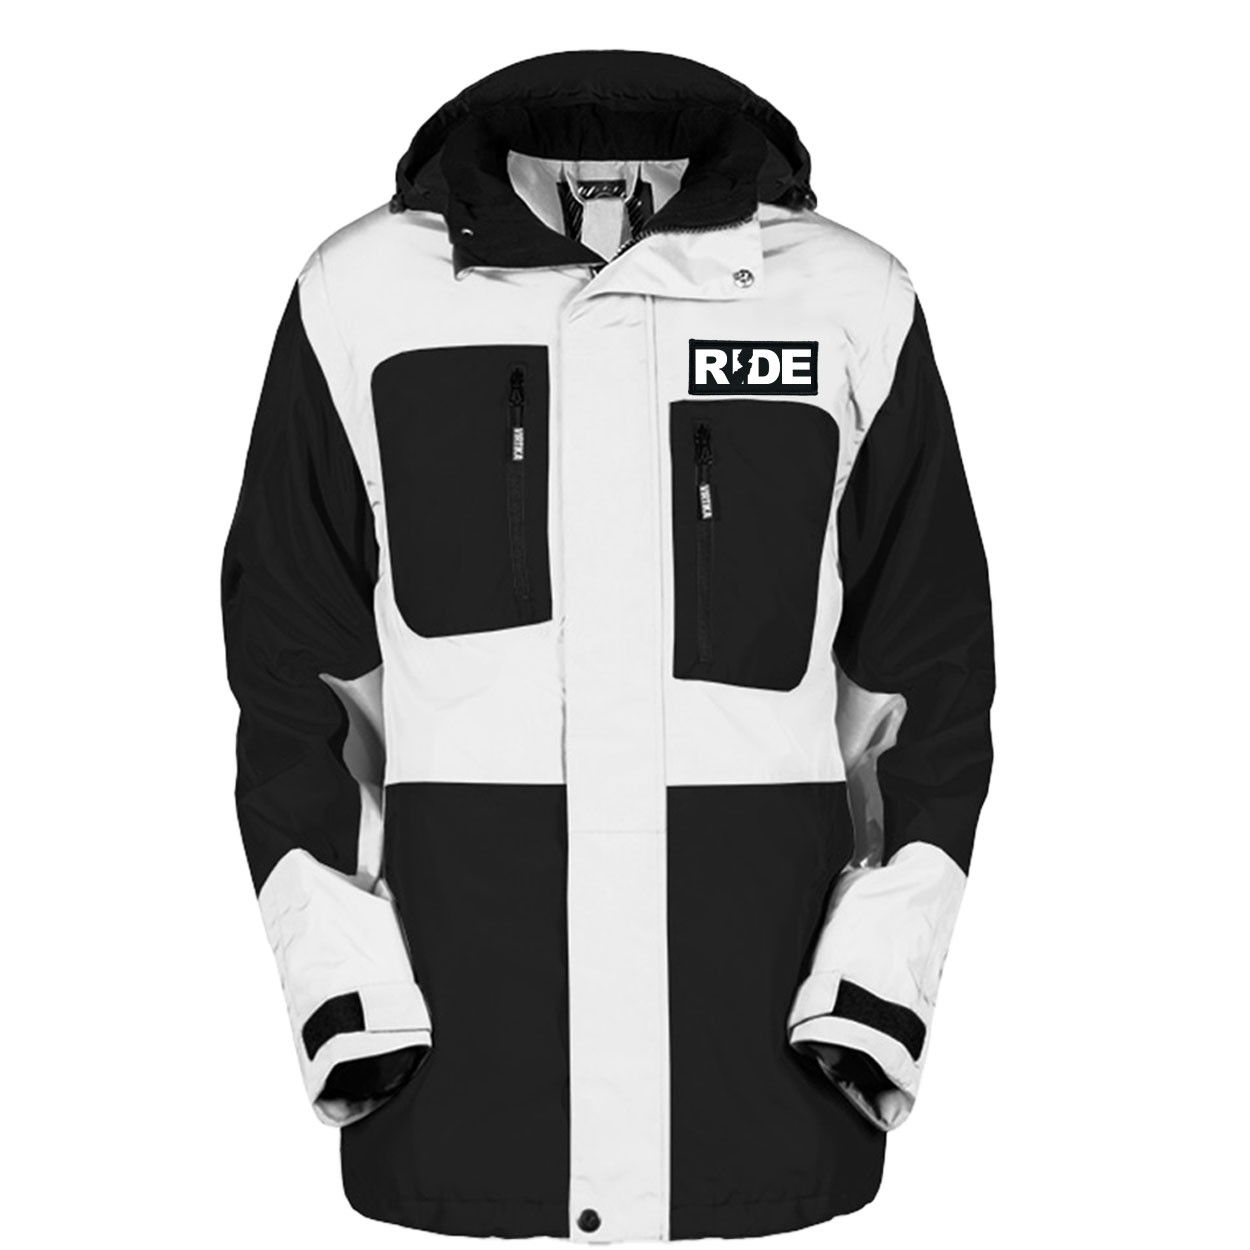 Ride New Jersey Classic Woven Patch Pro Snowboard Jacket (Black/White)